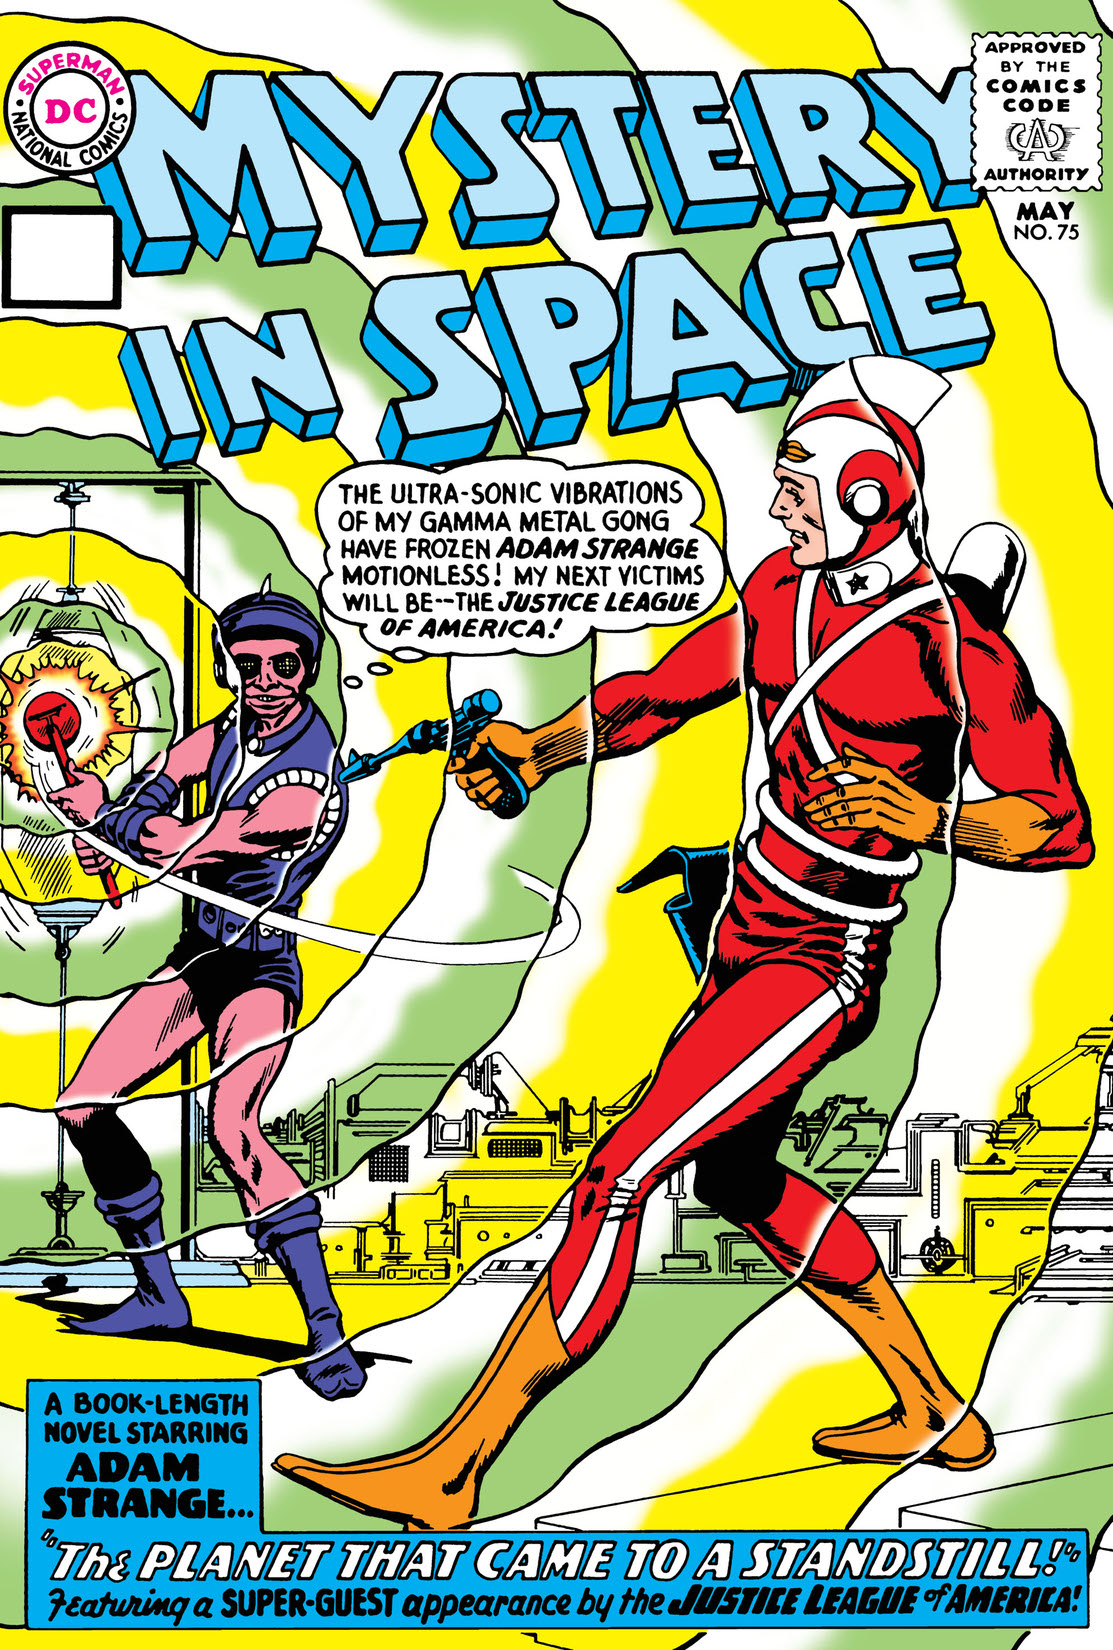 Mystery in Space (1951-) #75 preview images